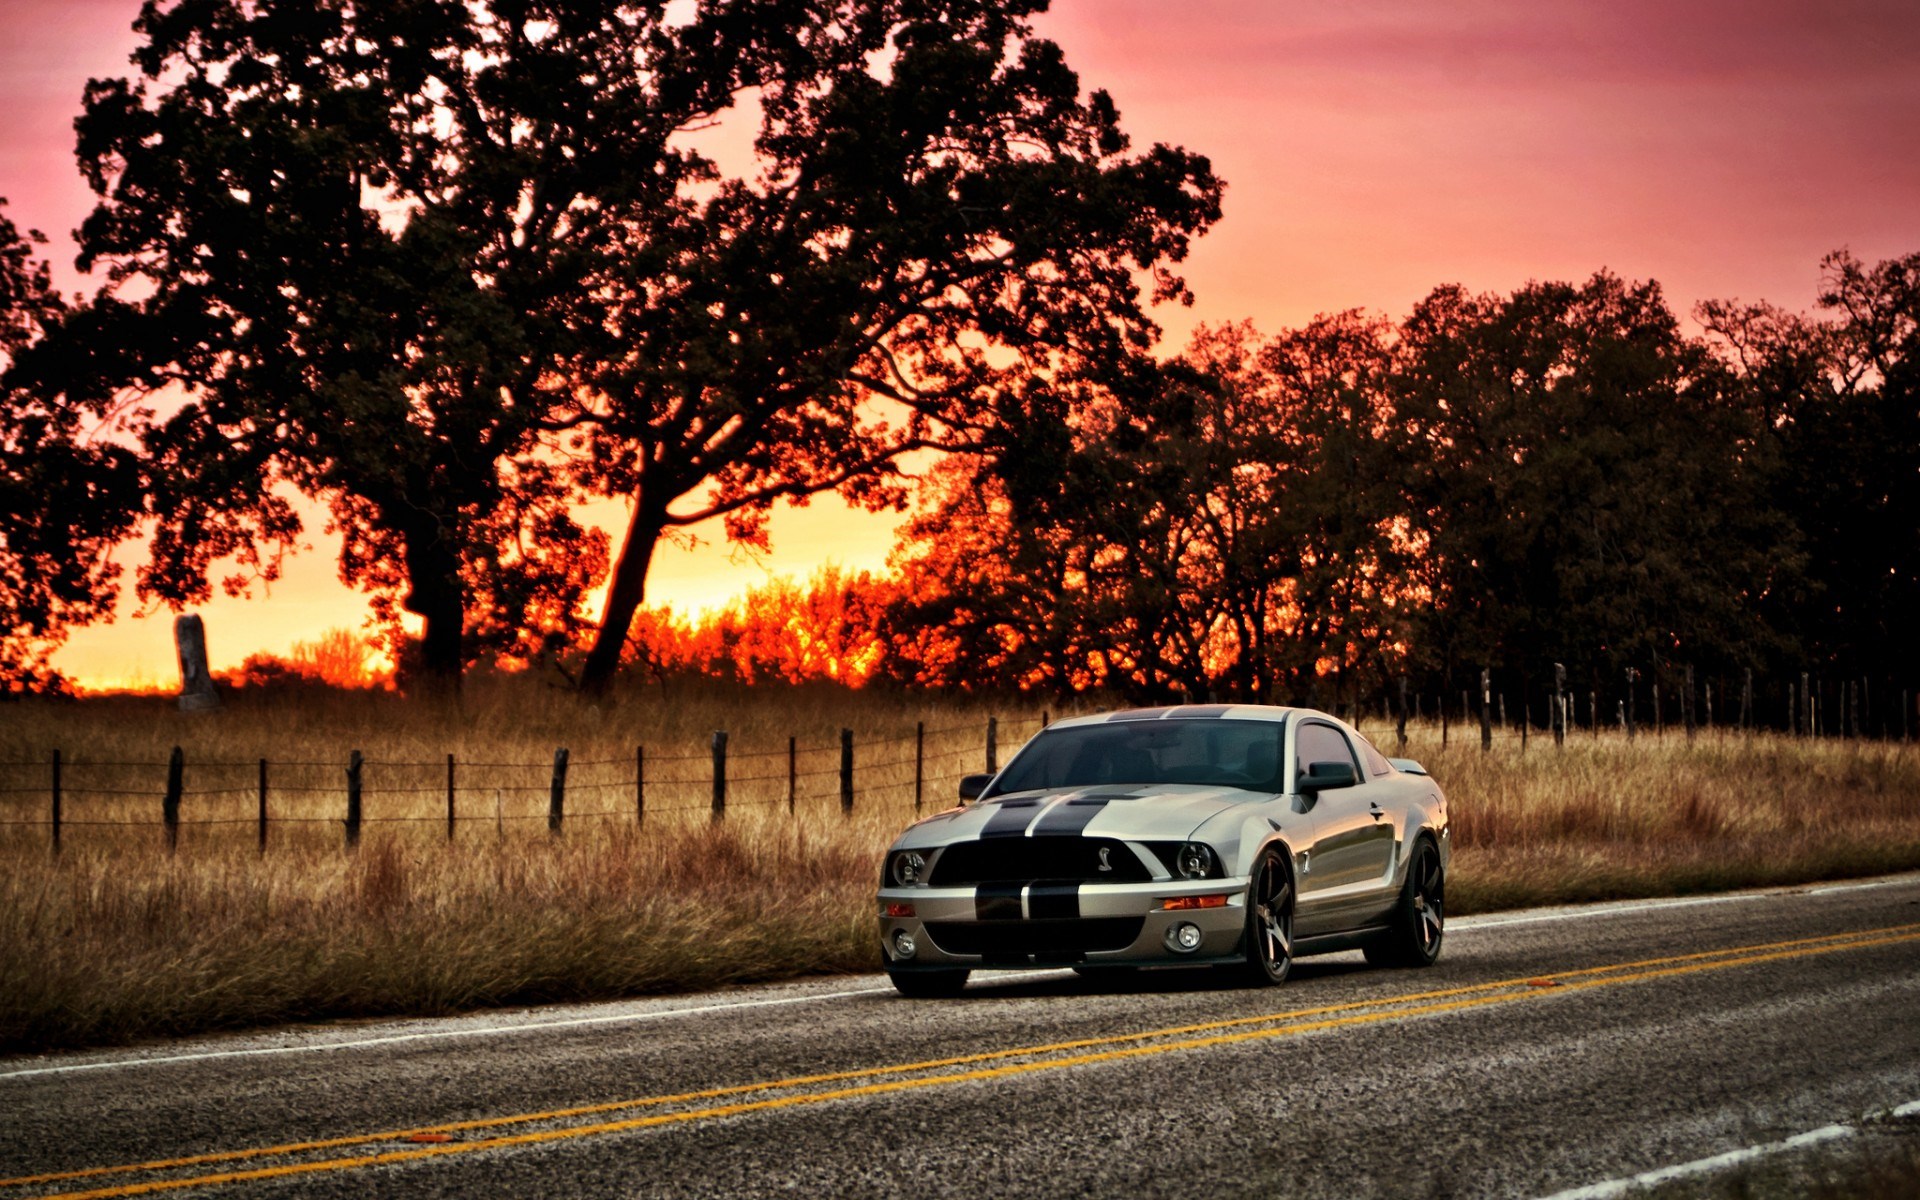 Ford Mustang Shelby Gt500 Muscle Car Road HD Wallpaper